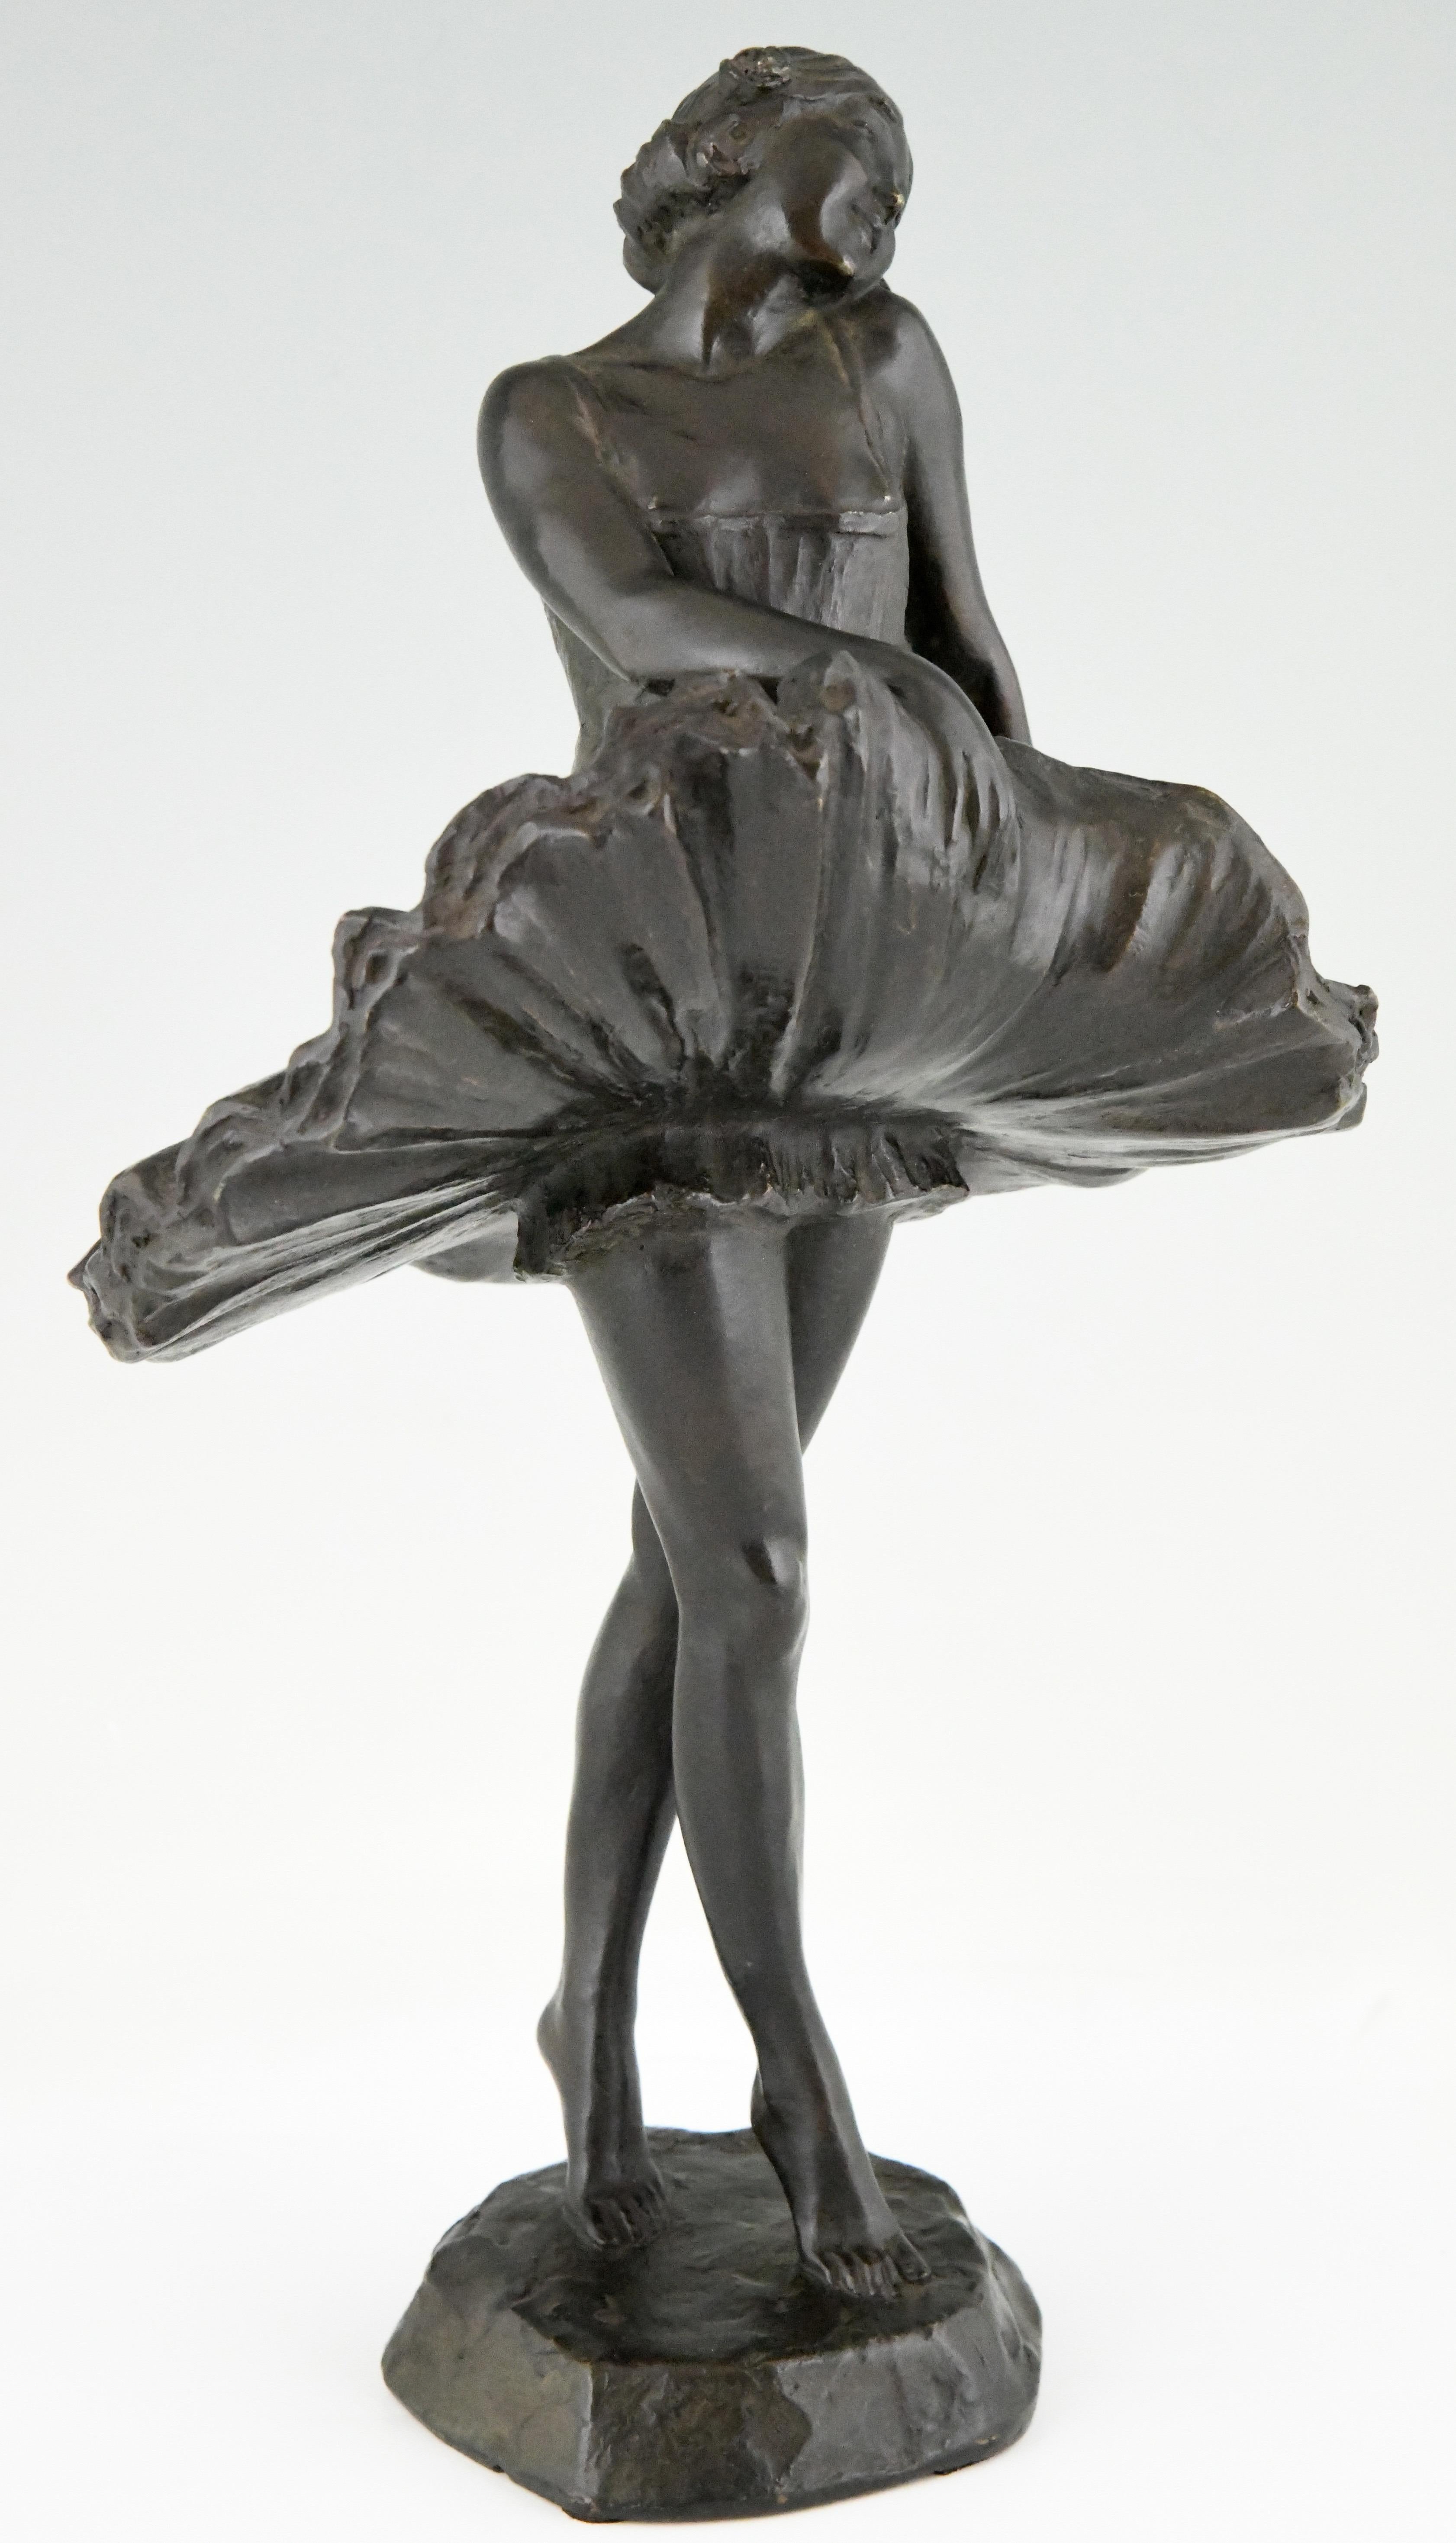 Elegant Art Deco bronze sculpture of a ballerina by Enrico Manfredo Di Palma-Falco, Italy 1886-1988
Cast at the Robecchi Foundry, who was the founder of Picasso and Troubetskoy.
The dancer is executed in the lost wax technique, marked Cire Perdue.